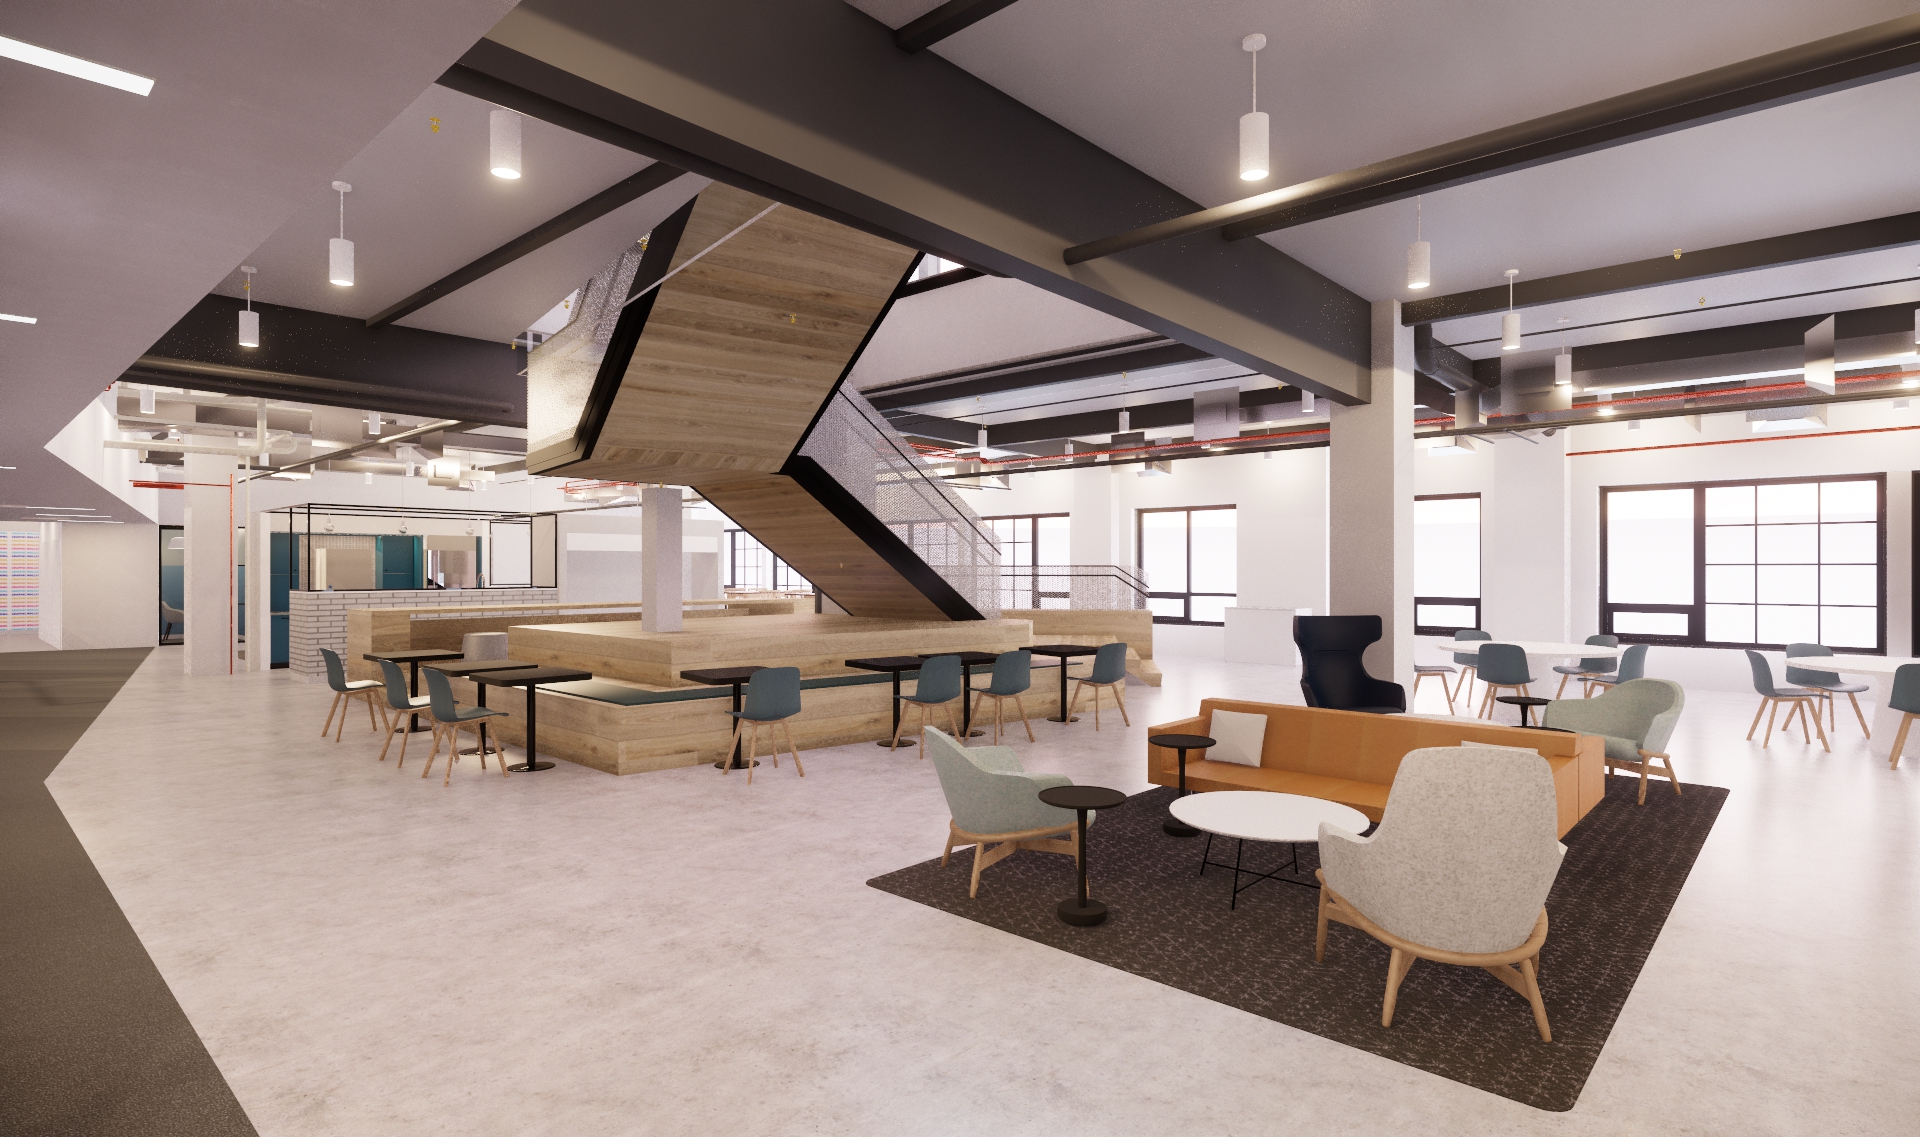 Pantry space and open collaboration at the new Mars Wrigley headquarters